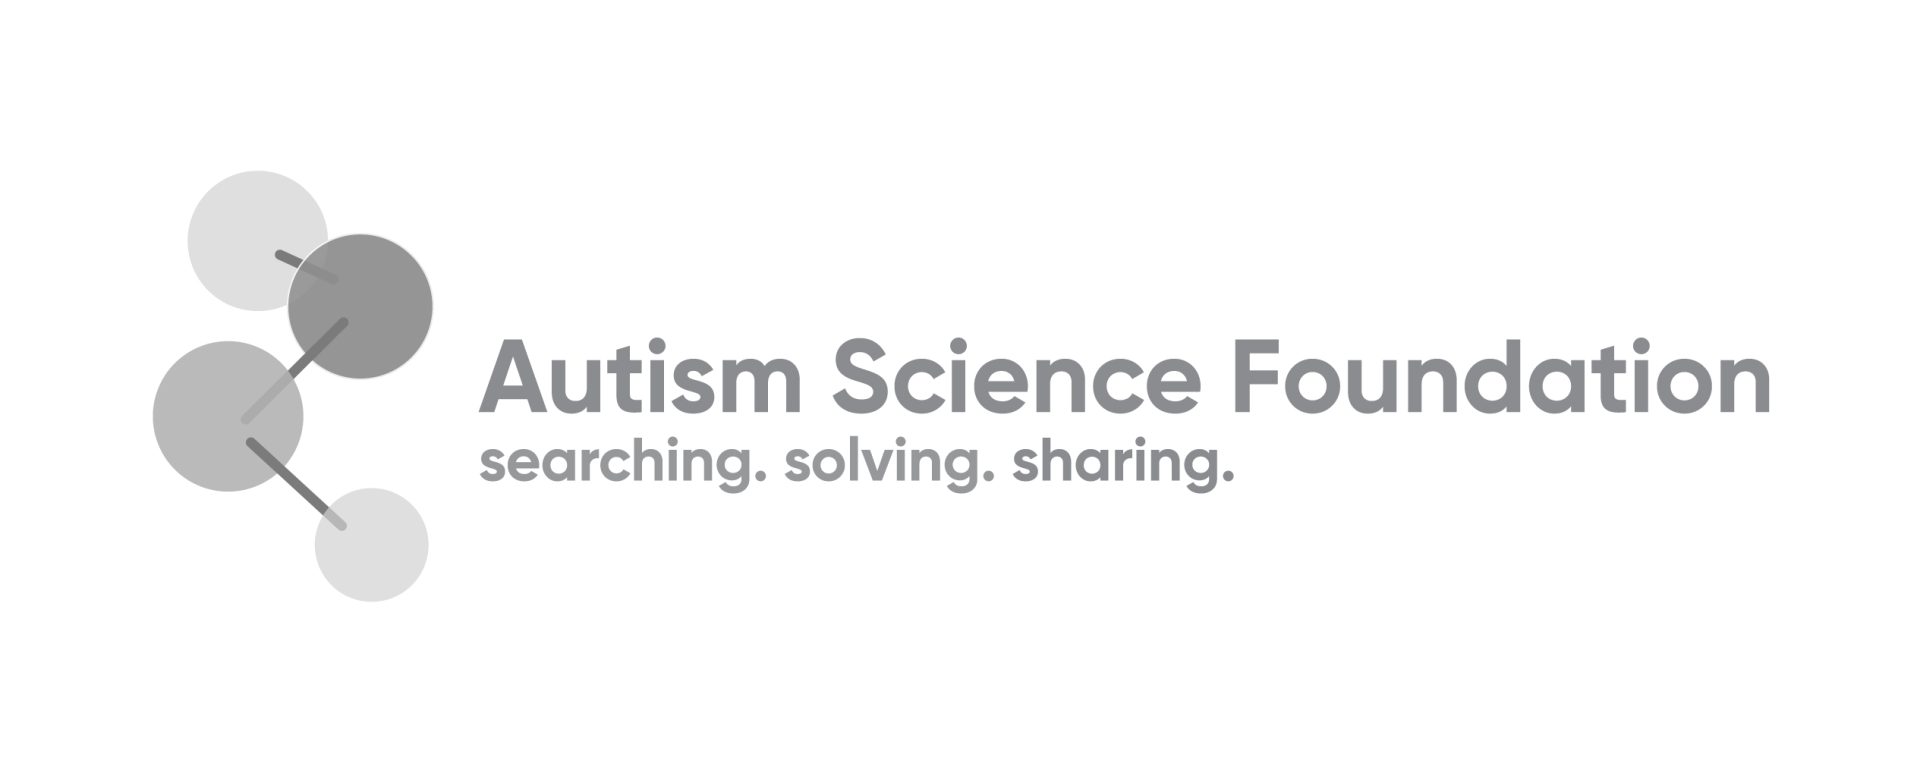 interior Autism Science Foundation Comments on Today’s CDC Data Indicating 1 in 44 Children Diagnosed with Autism banner image